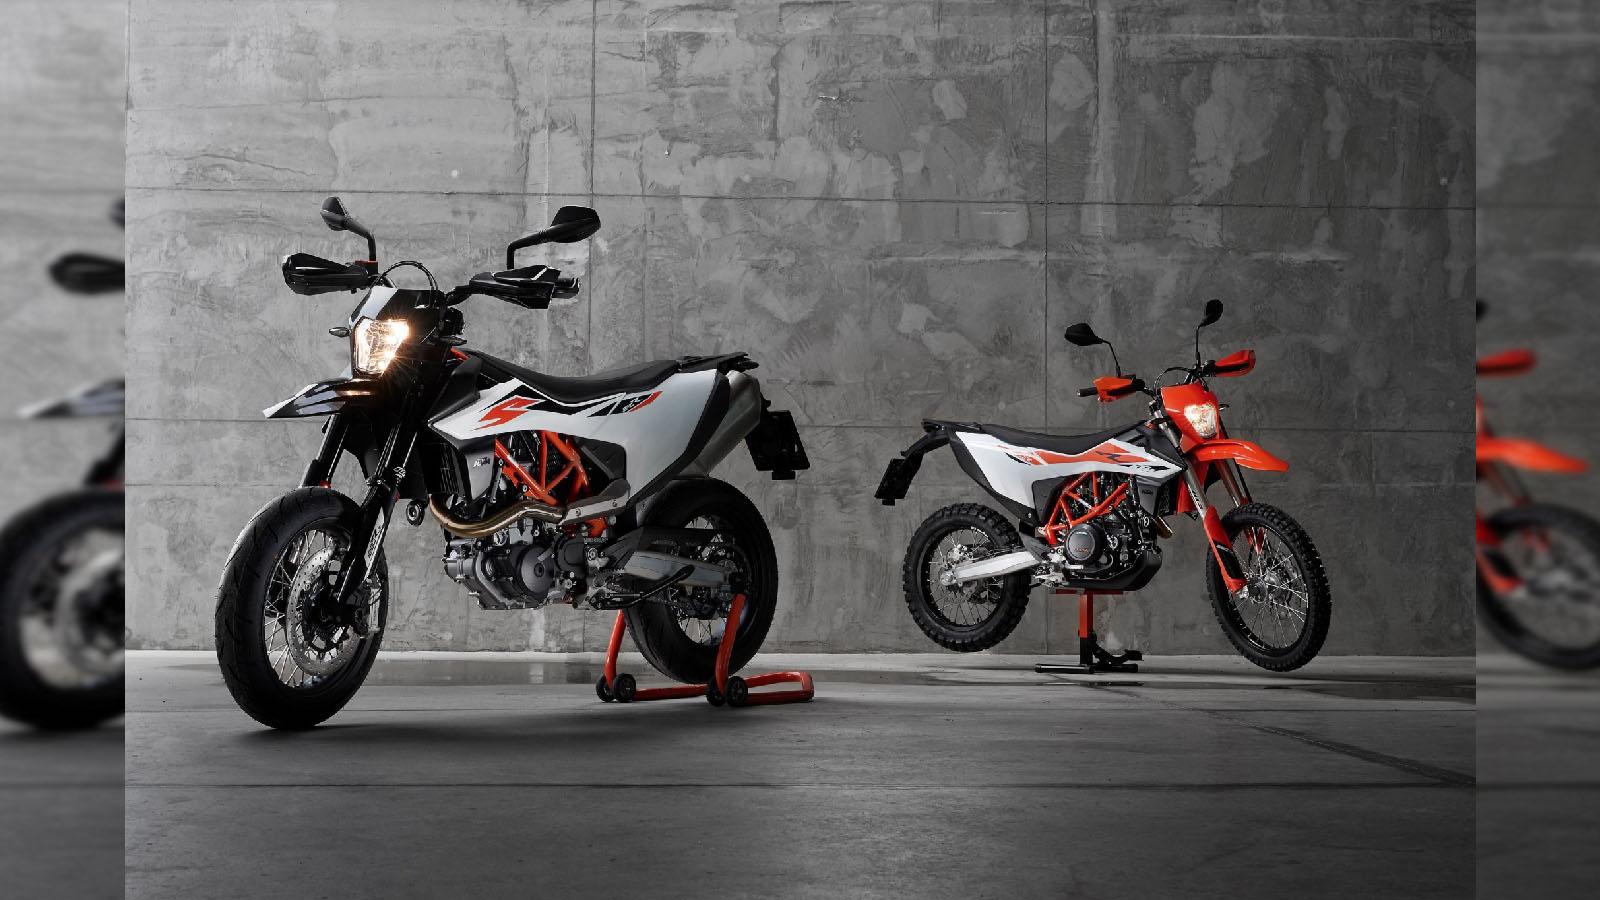 KTM Released its Upgraded 690 SMC R and Enduro R